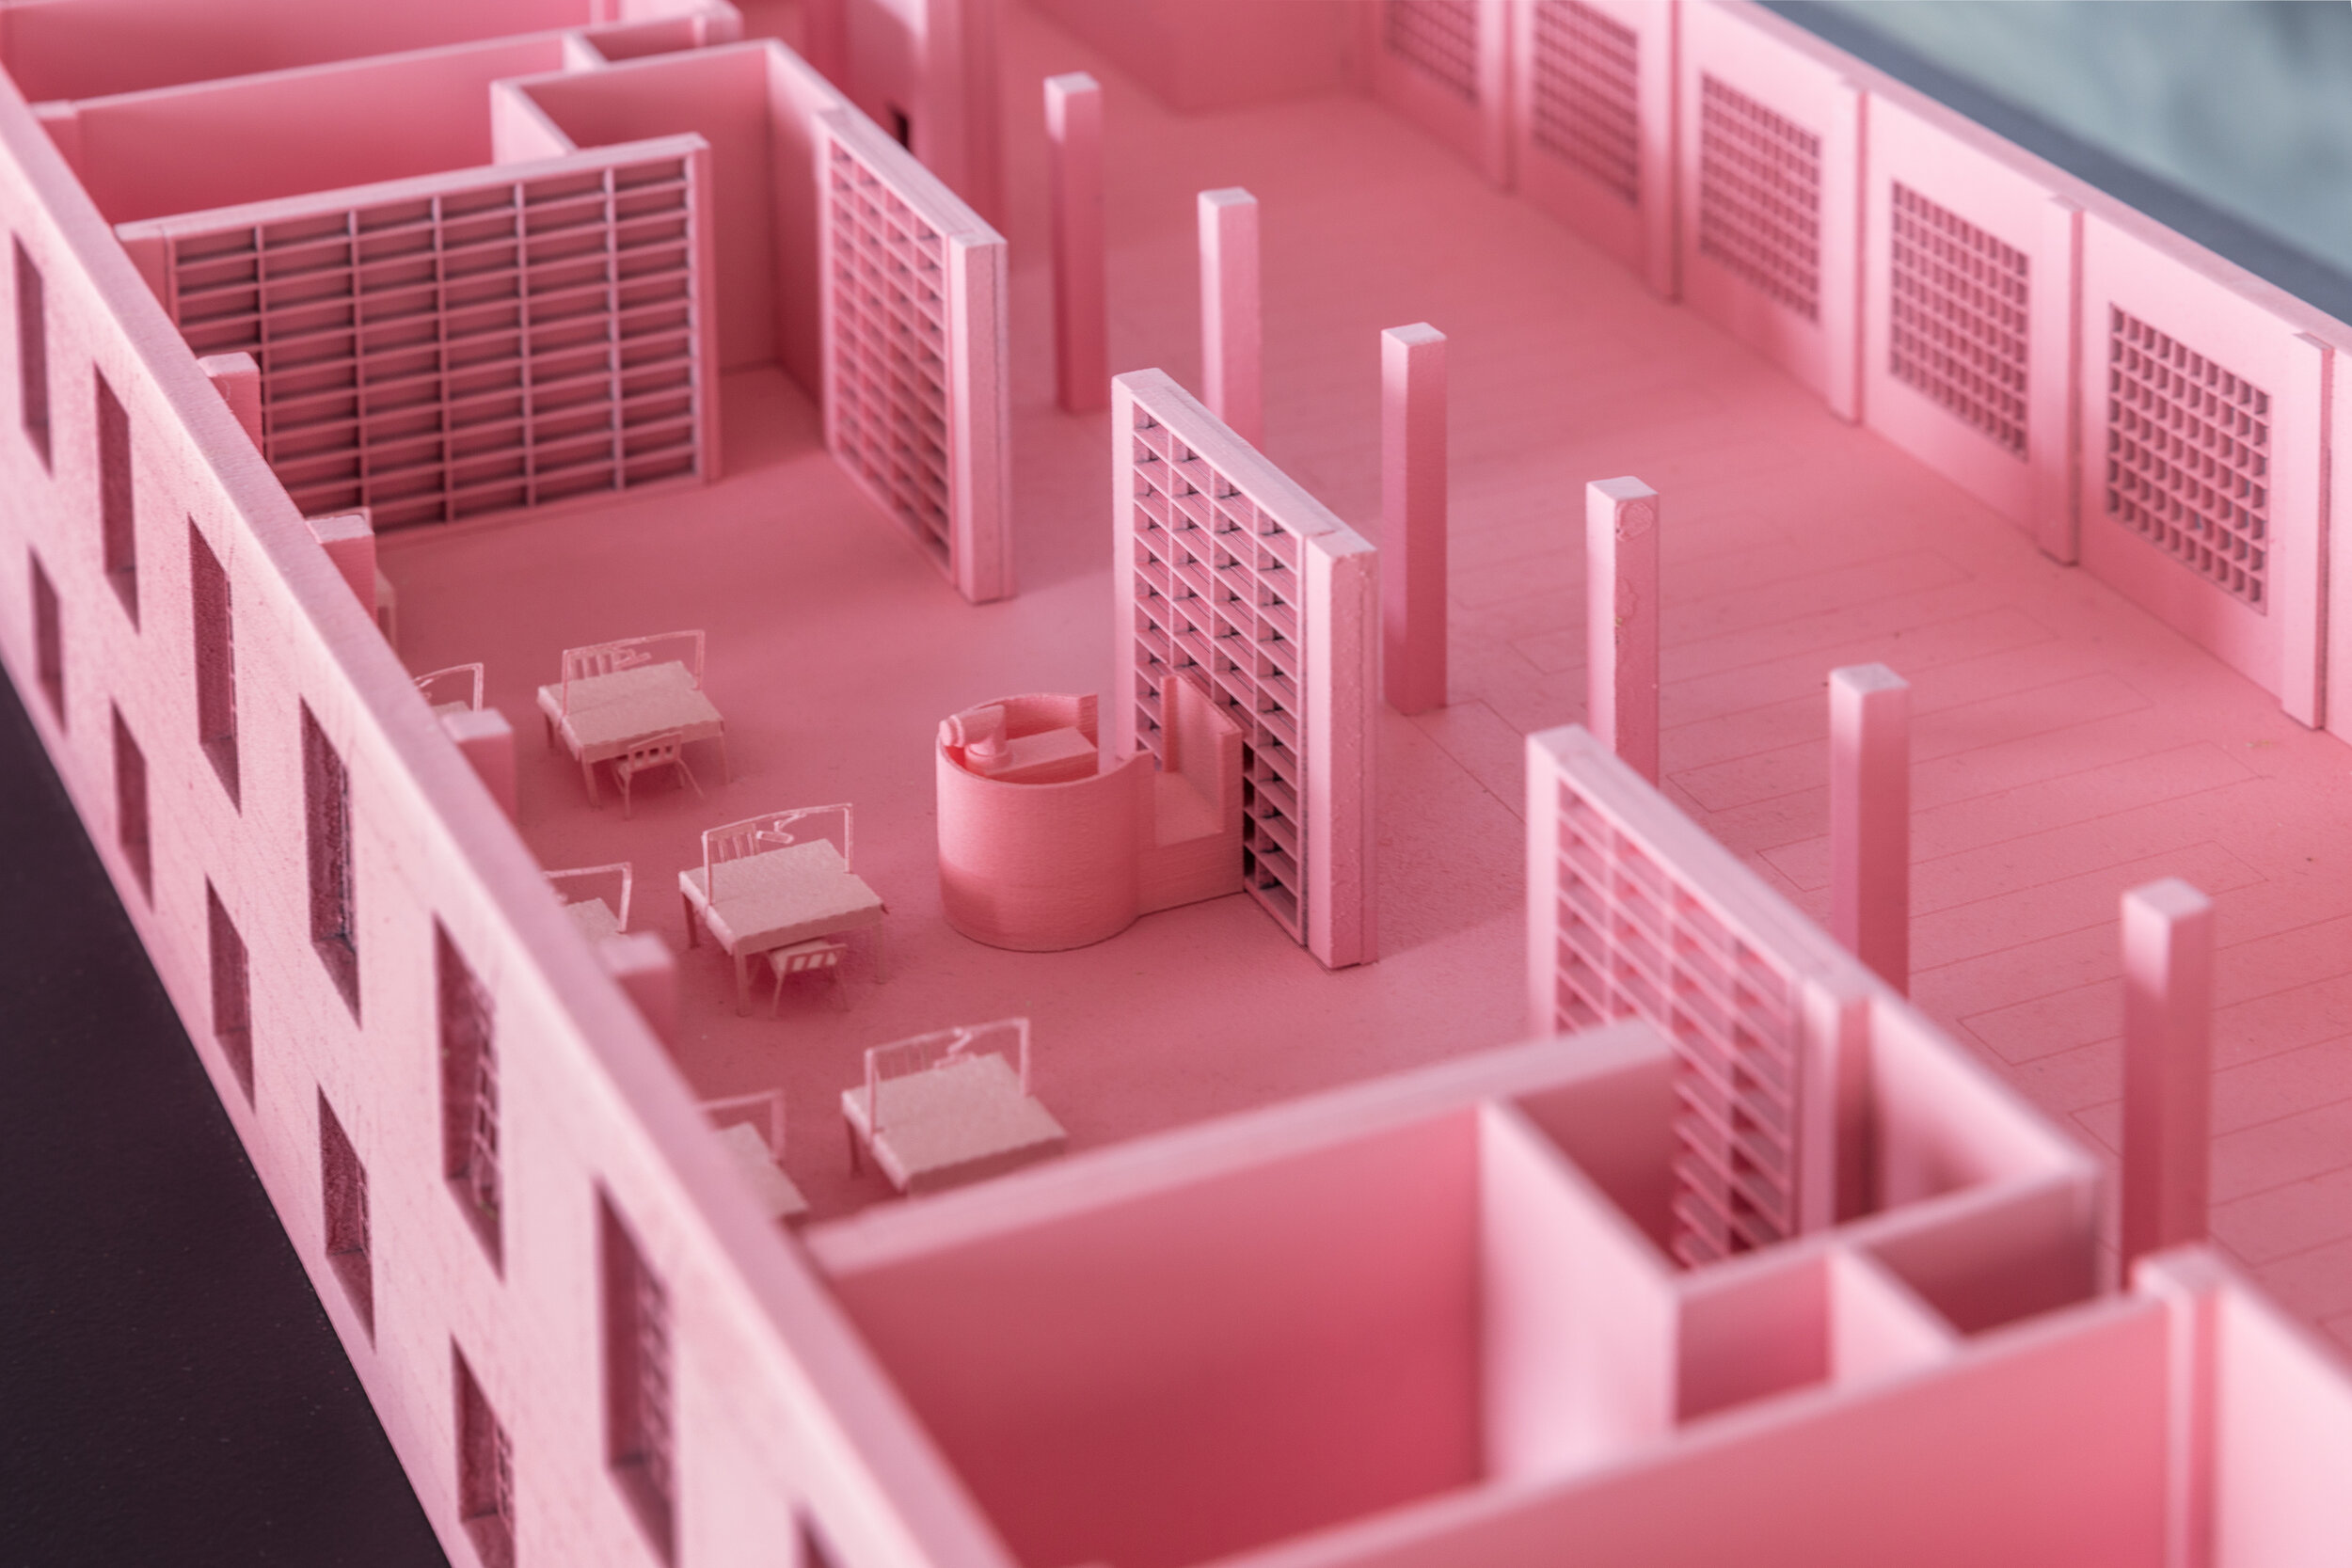  Plan model of Thames House in pink shows in detail the interiors designed for the Institute by the avant-garde architects Tecton, with shelves and furniture moved from Hamburg.  Model maker Pål Sanchez-Paredes. Photo: Tor S. Ulstein / KUNSTDOK. 